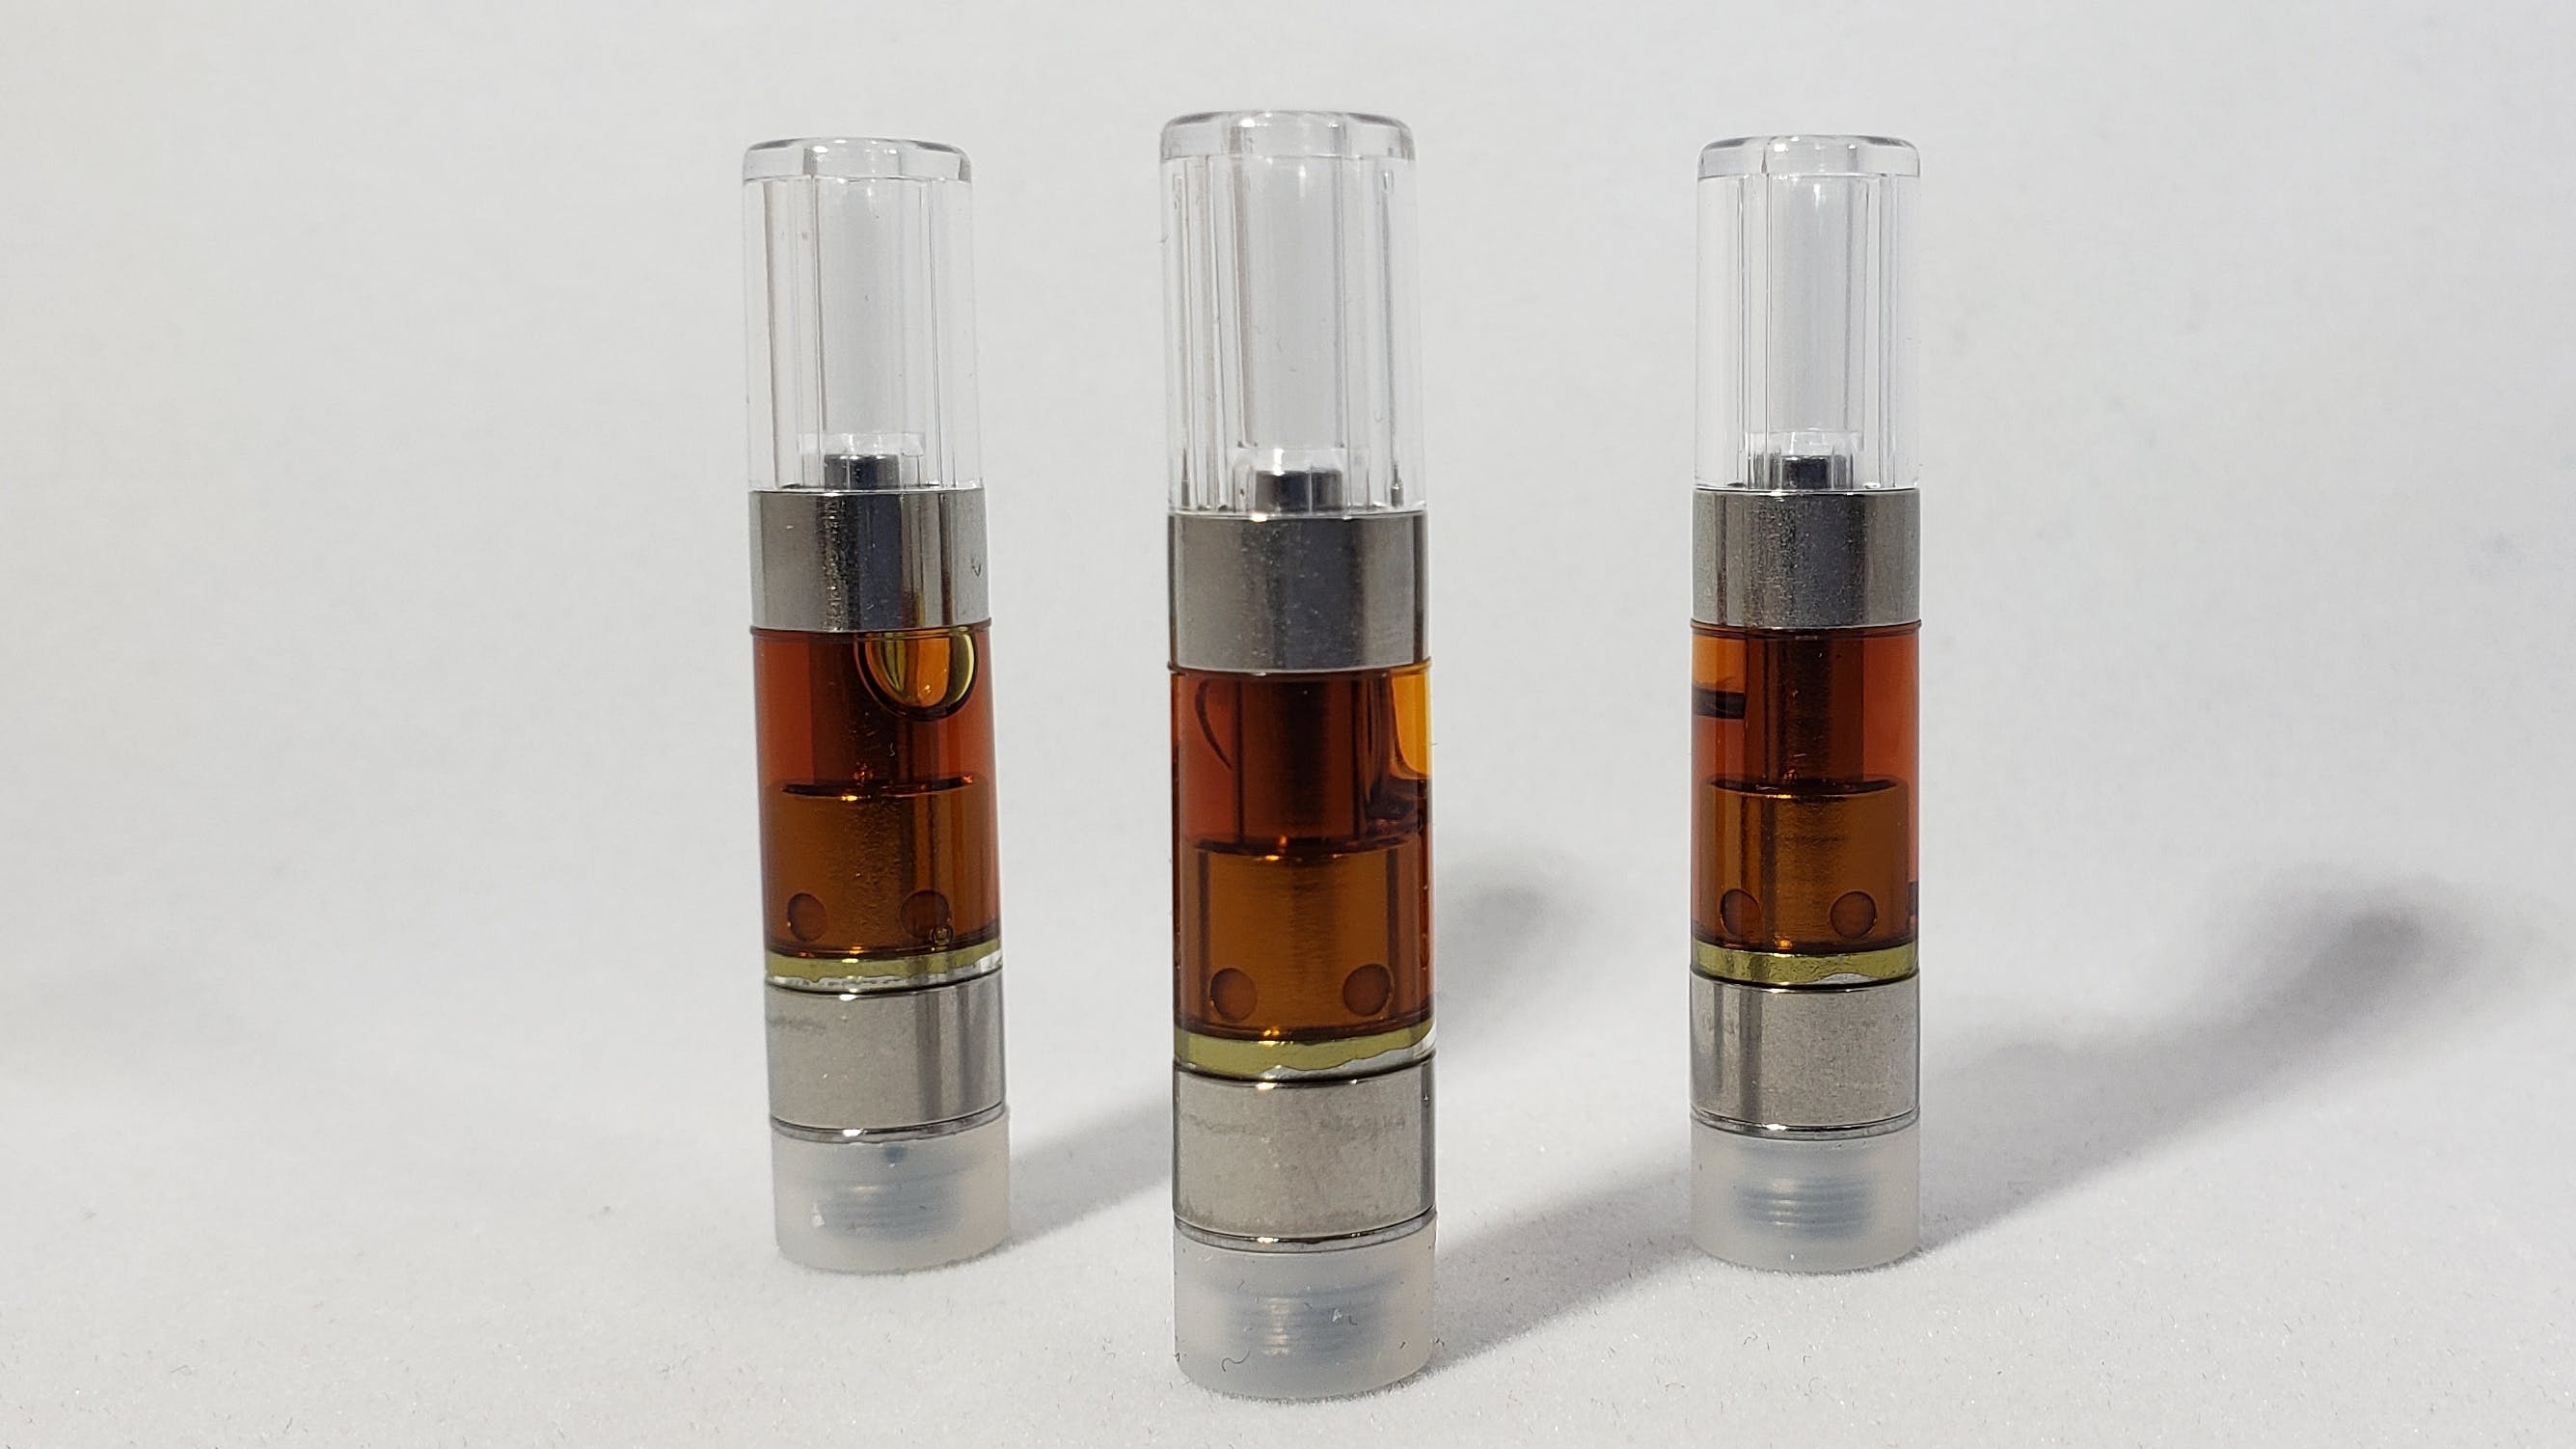 concentrate-irie-extracts-cartridges-500mg-sativa